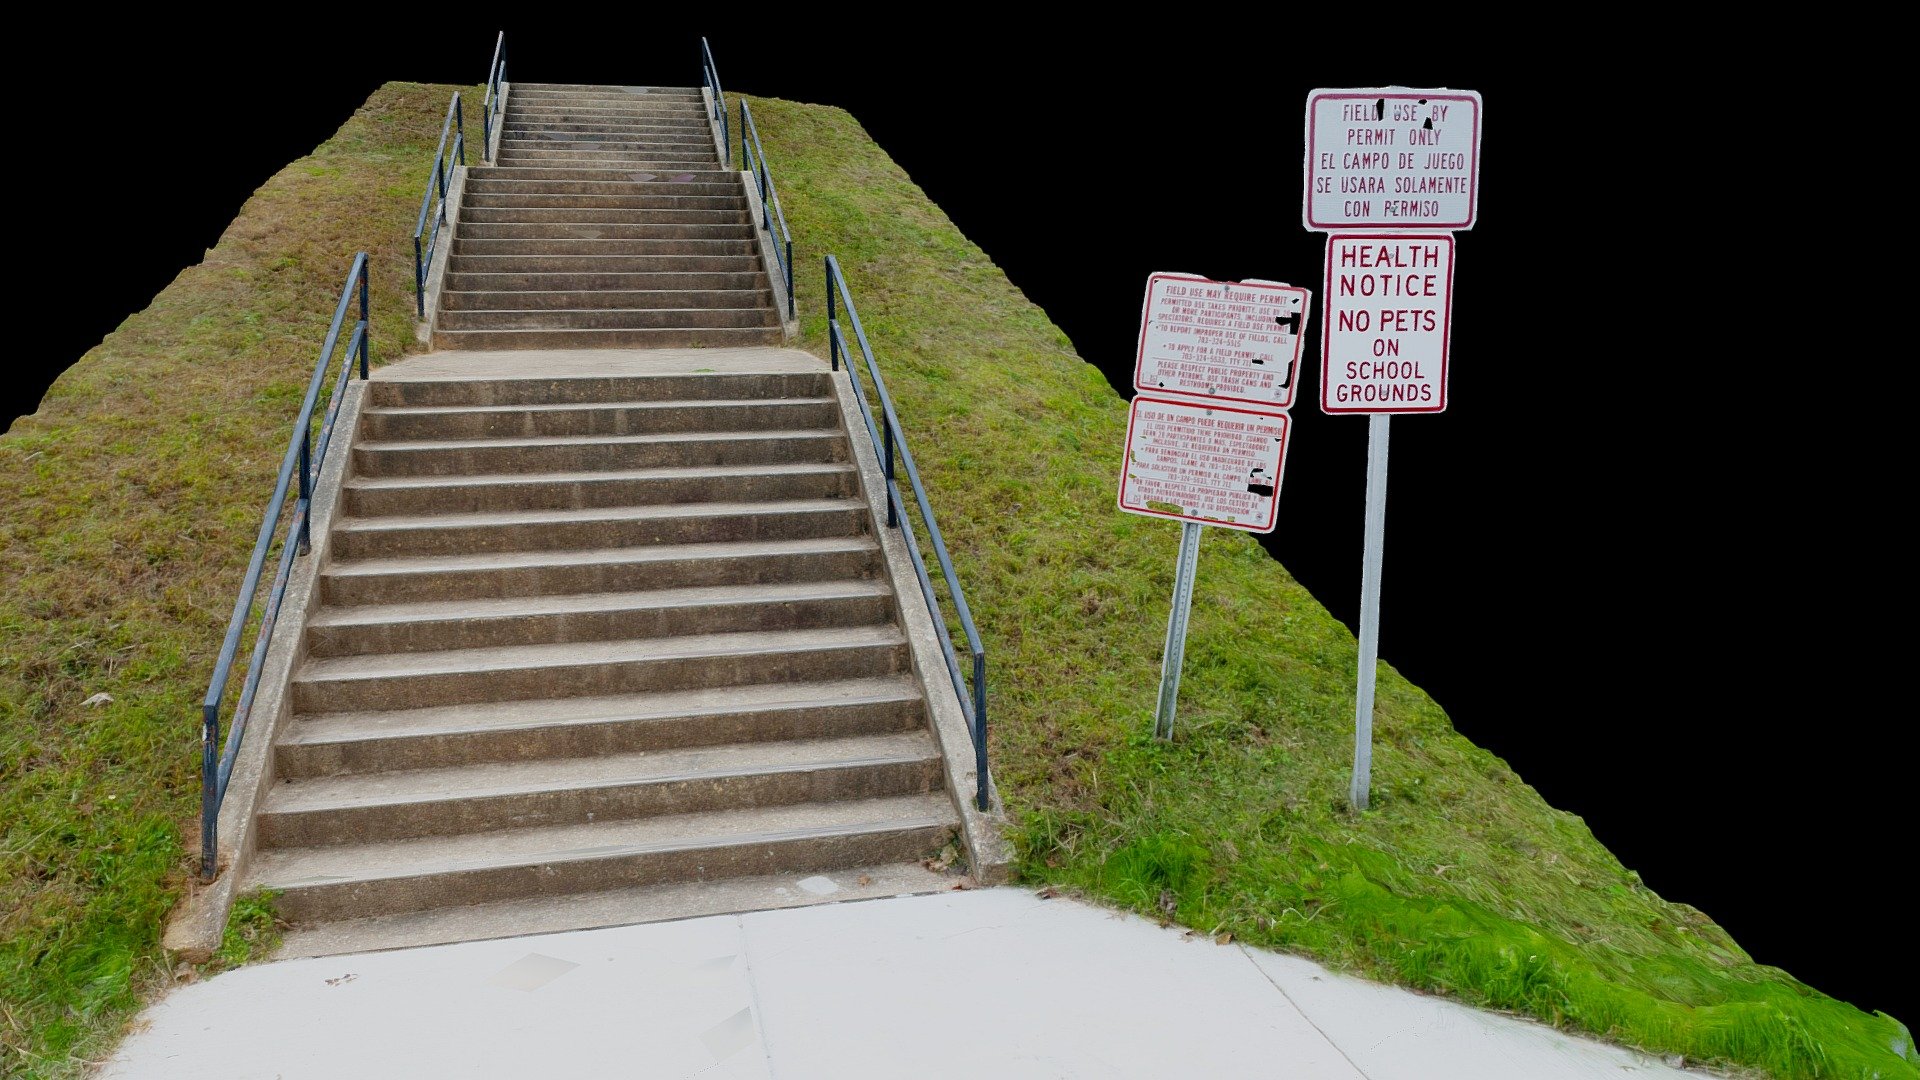 Photogrammeyry of tripple stair set behind Shrevewood Elementary in Falls Church, VA.
Learned consistent lighting really does make a big difference! All but 12 photos aligned in this one.
Photos taken with Nikon D3000 and meshed in Reality Capture 3d model